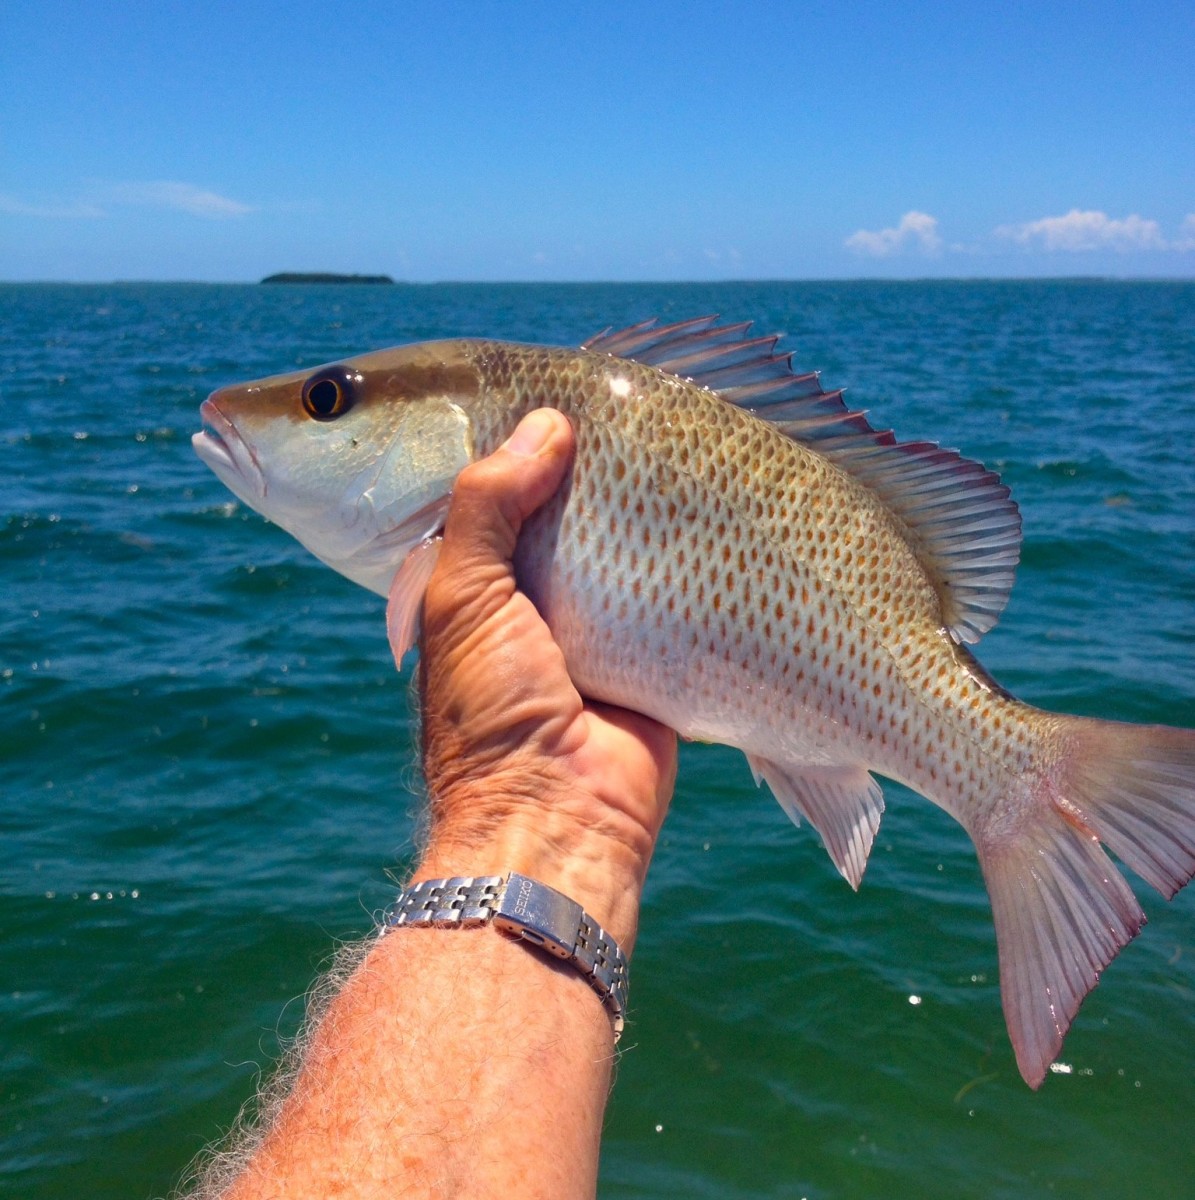 How to Locate and Catch Mangrove Snapper